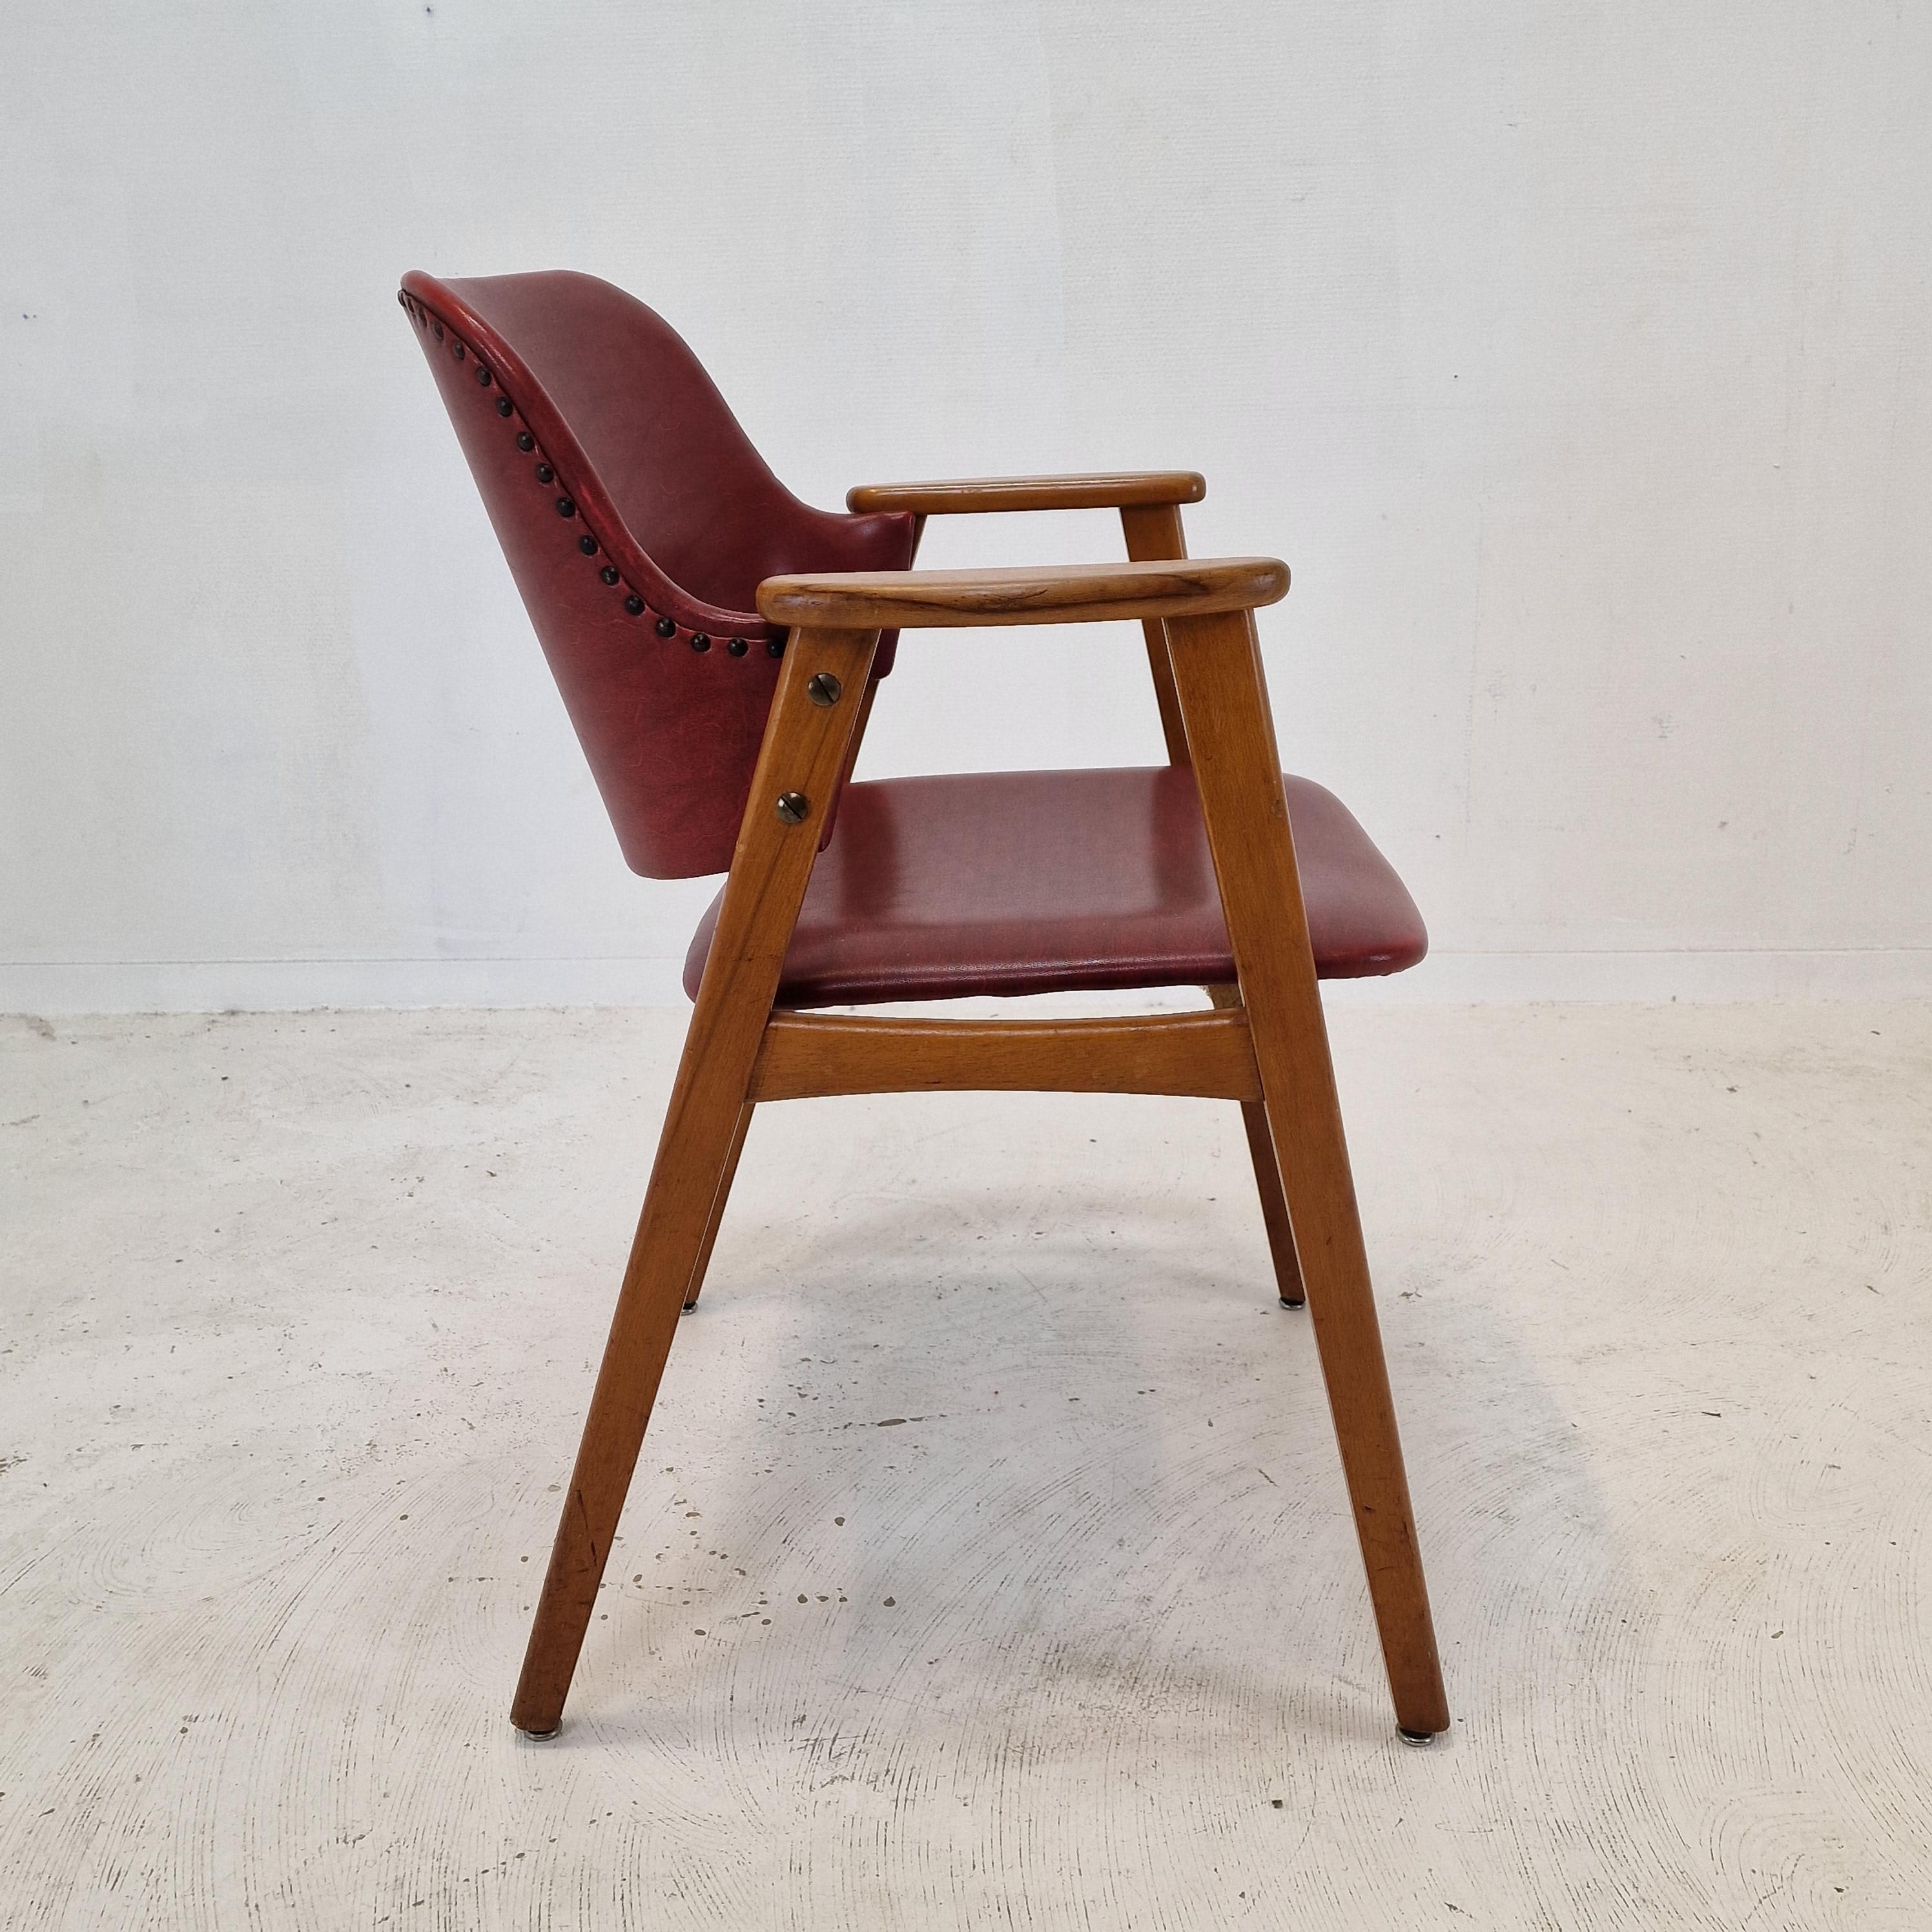 Midcentury Dining or Restaurant Chairs by Cees Braakman for Pastoe, 1950s For Sale 1